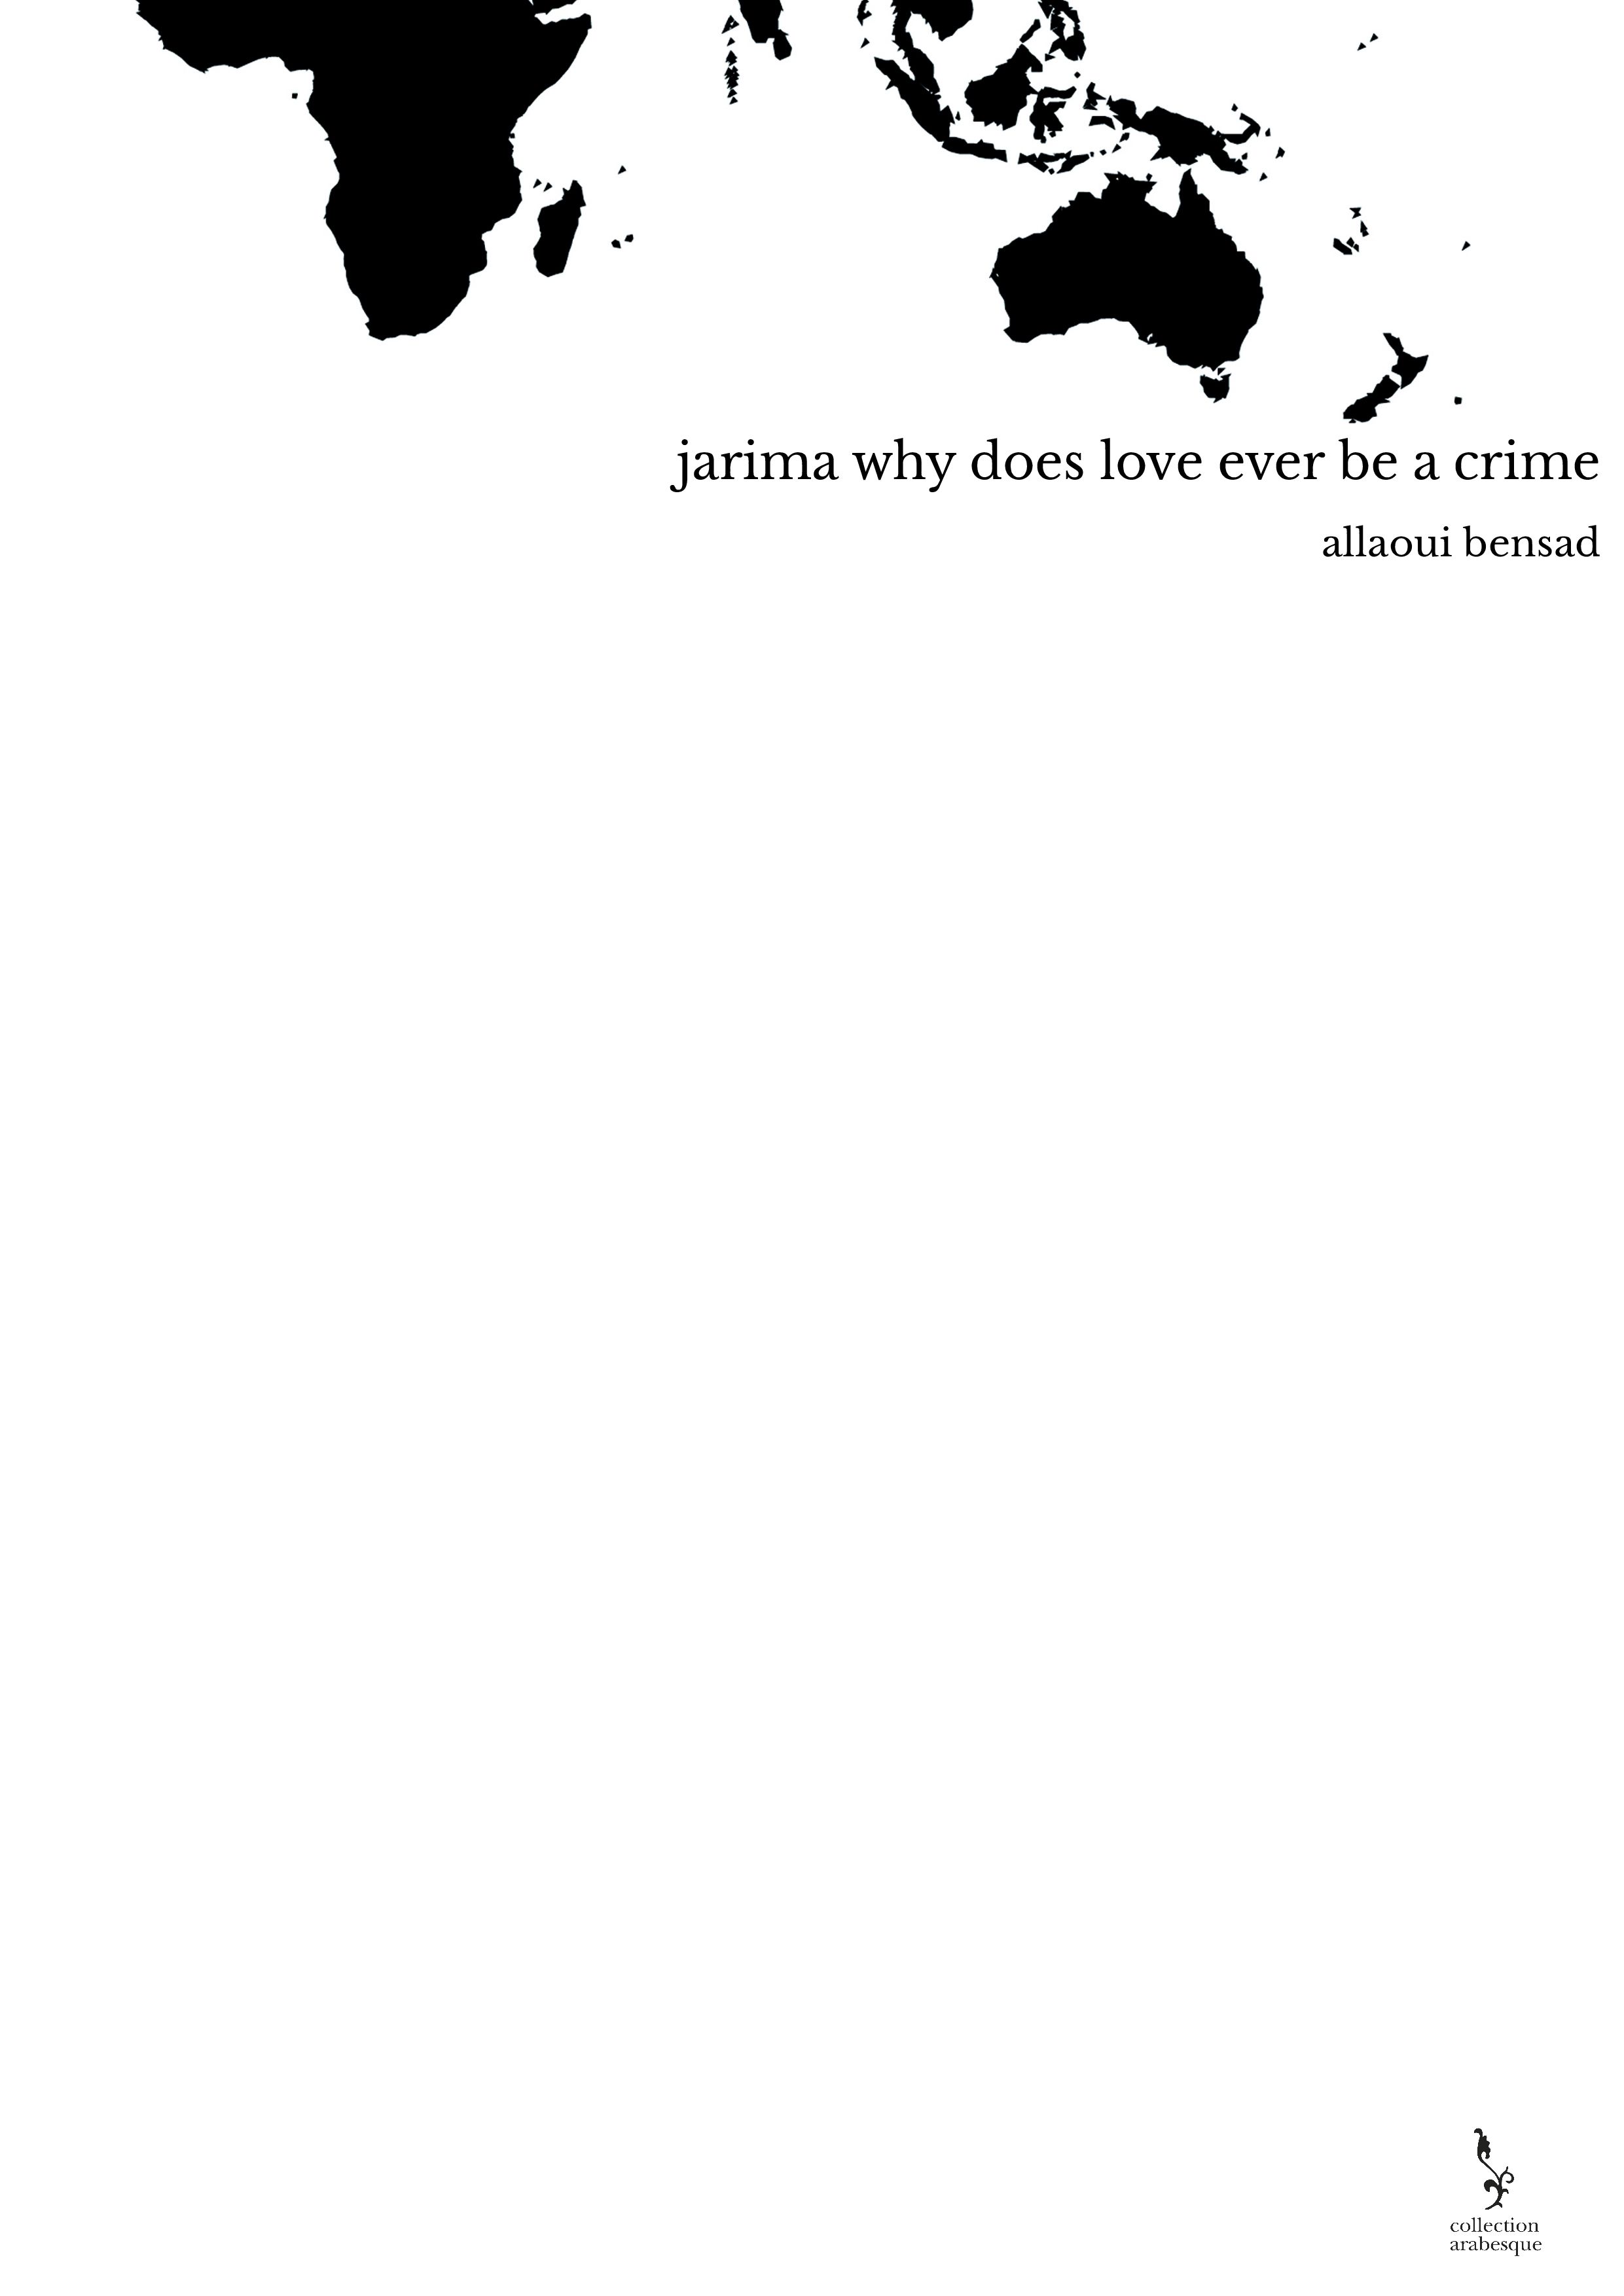 jarima why does love ever be a crime